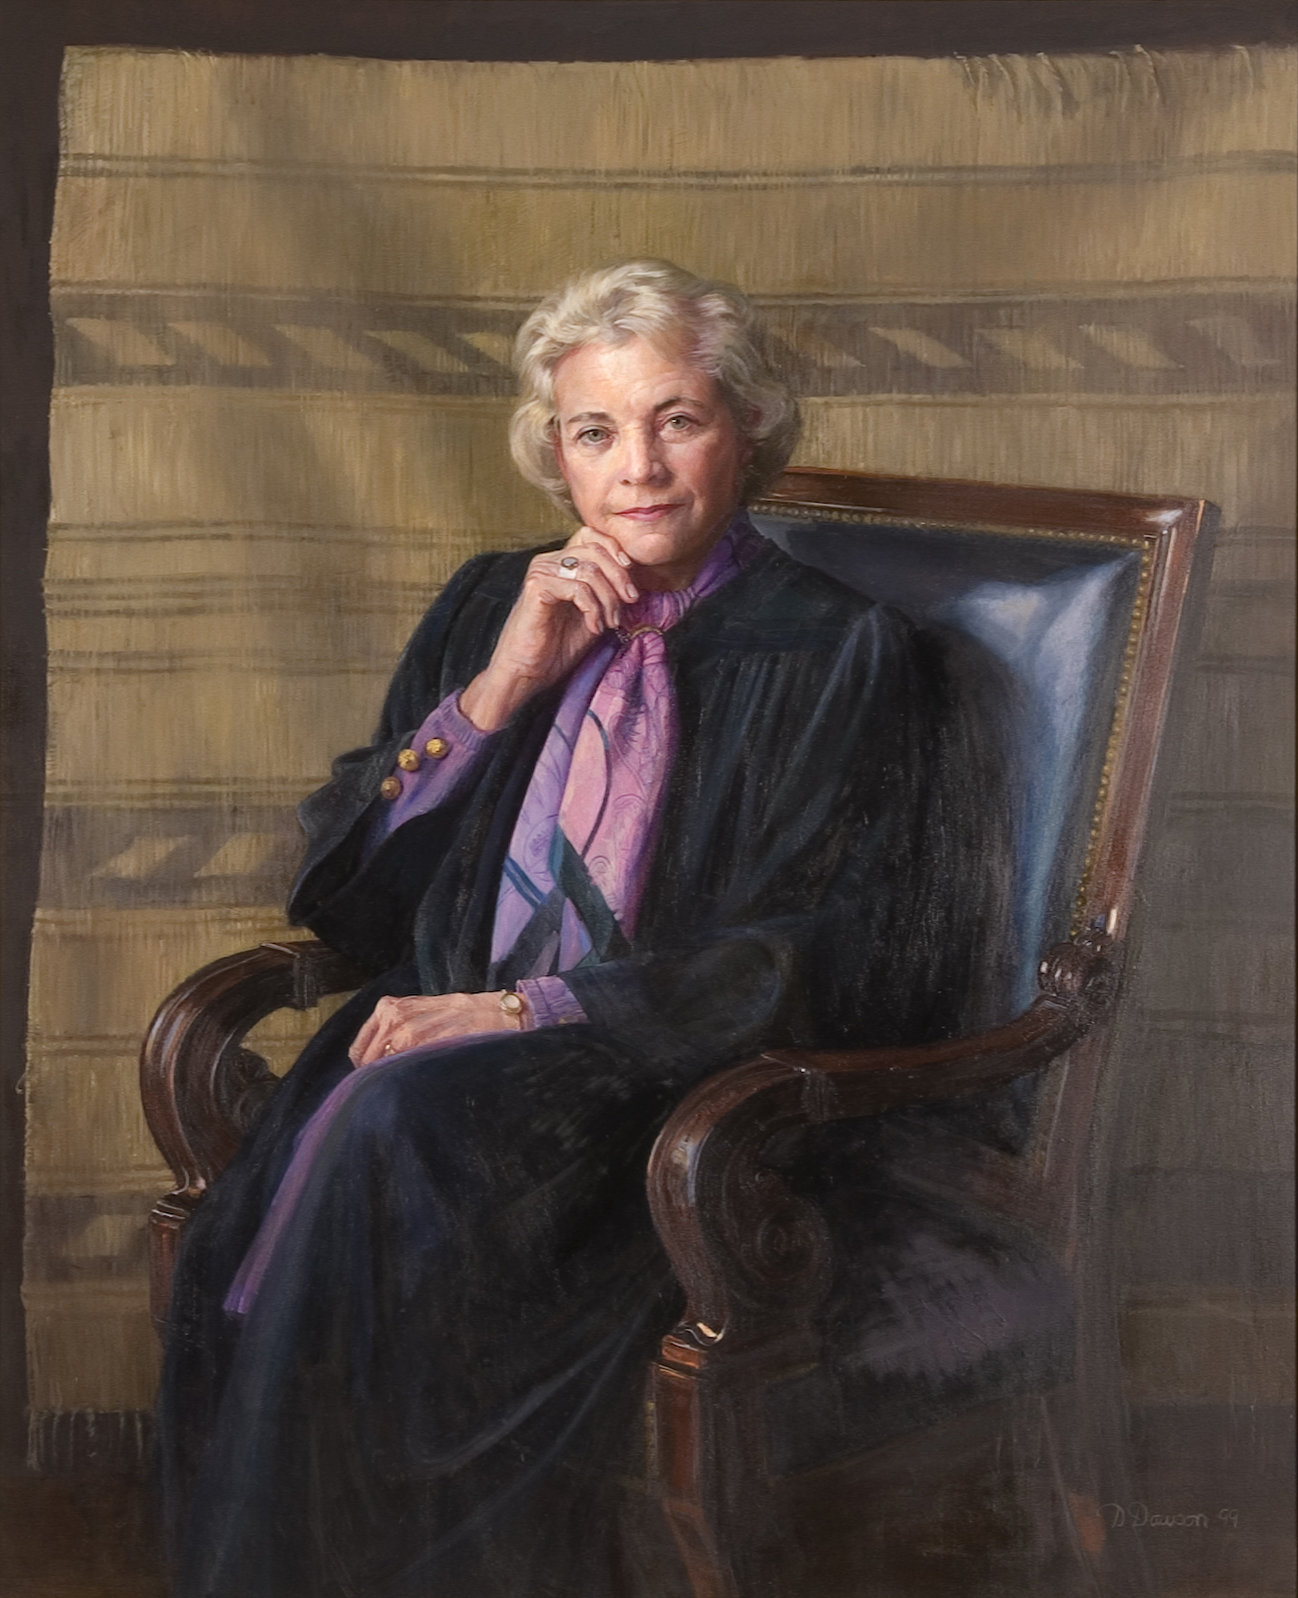 who appointed sandra day o connor